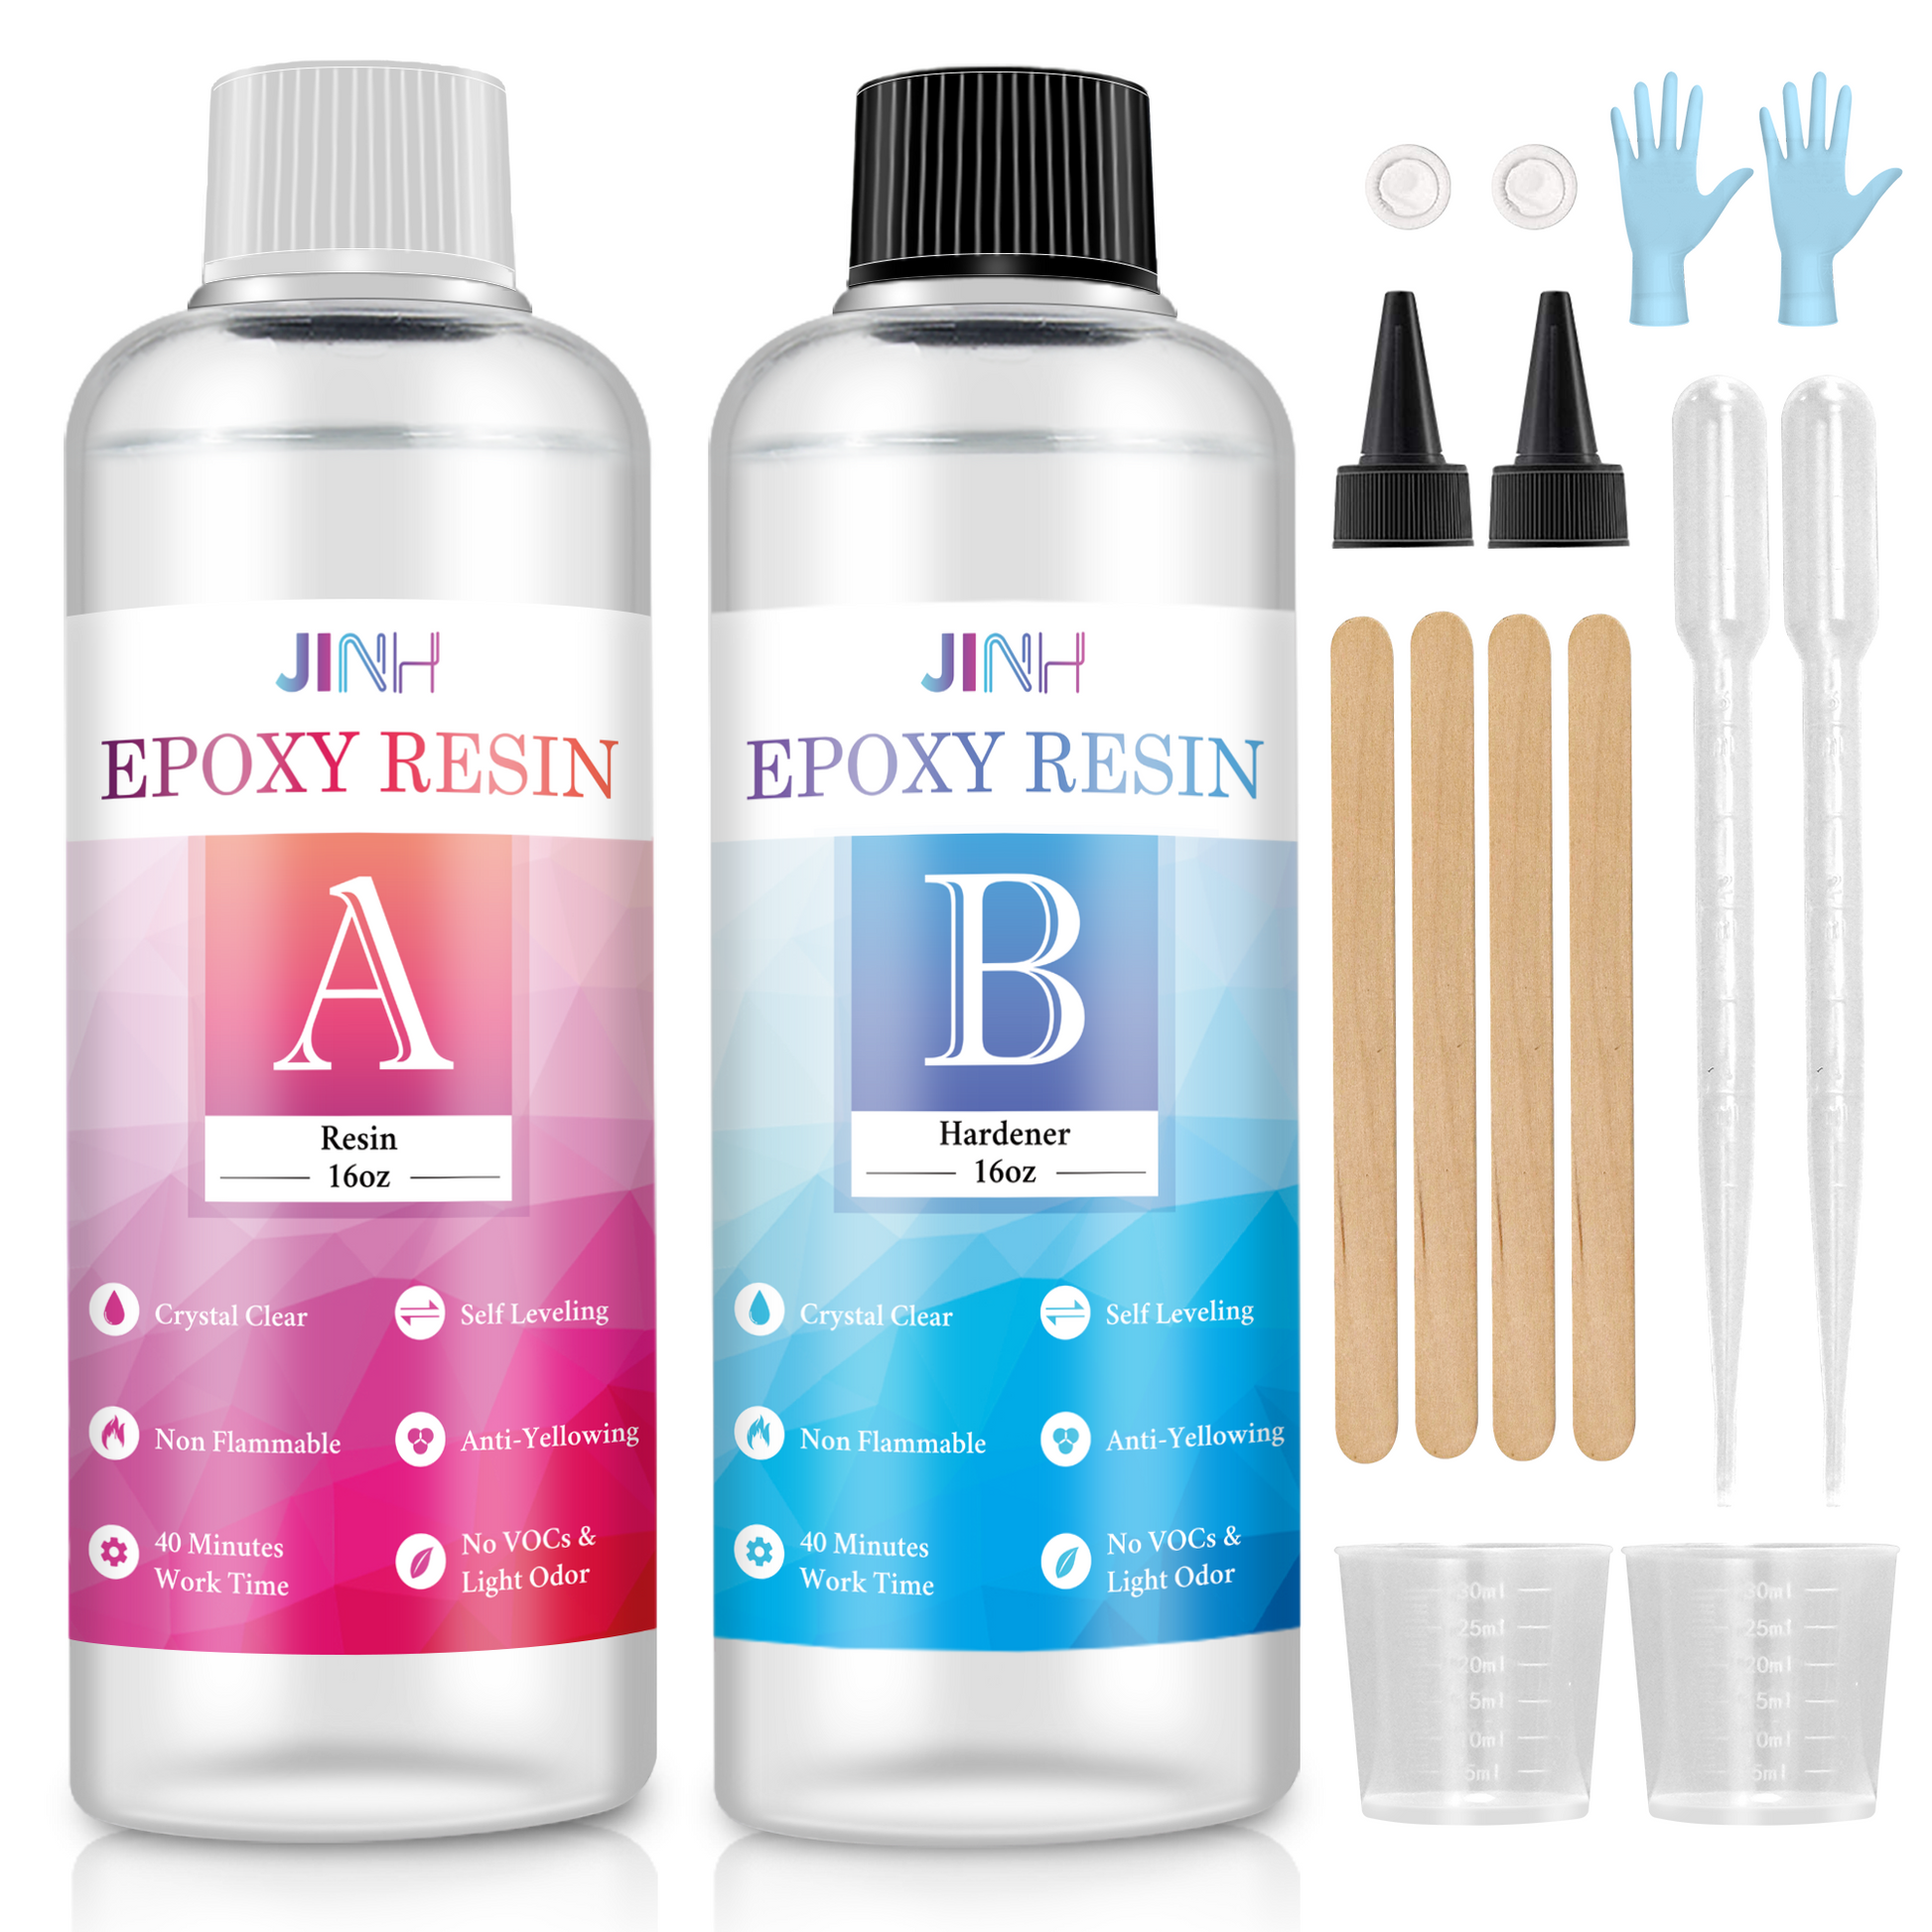 Which epoxy resin should you choose? - ResinPro - Creativity at